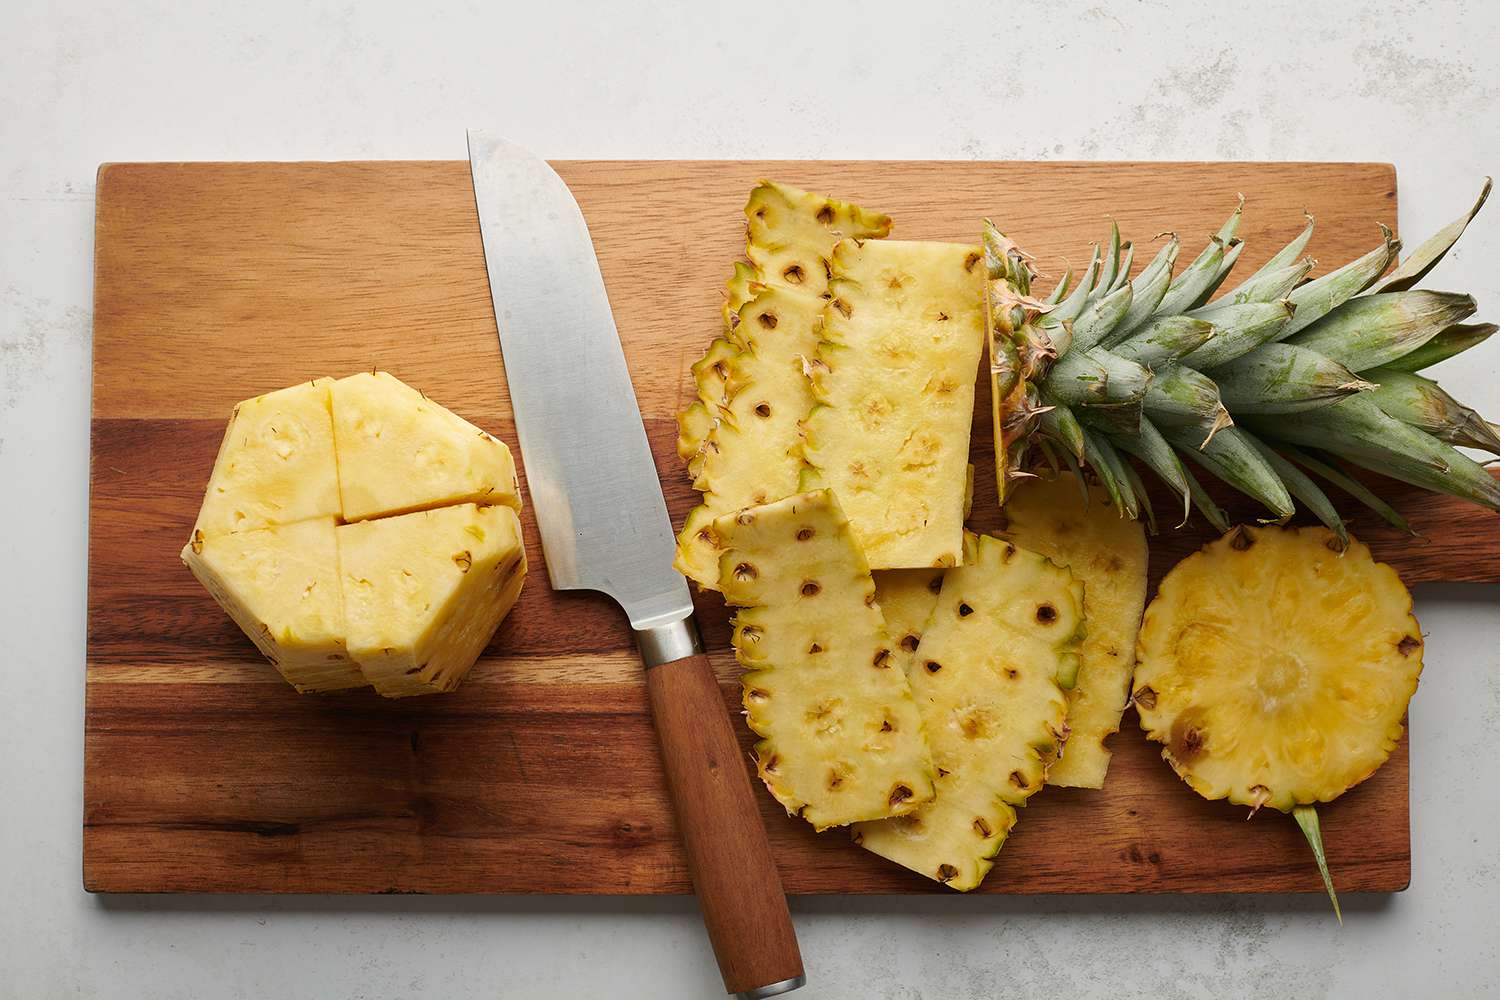 Sliced pineapple with the top and skin removed on a wooden cutting board with a knife